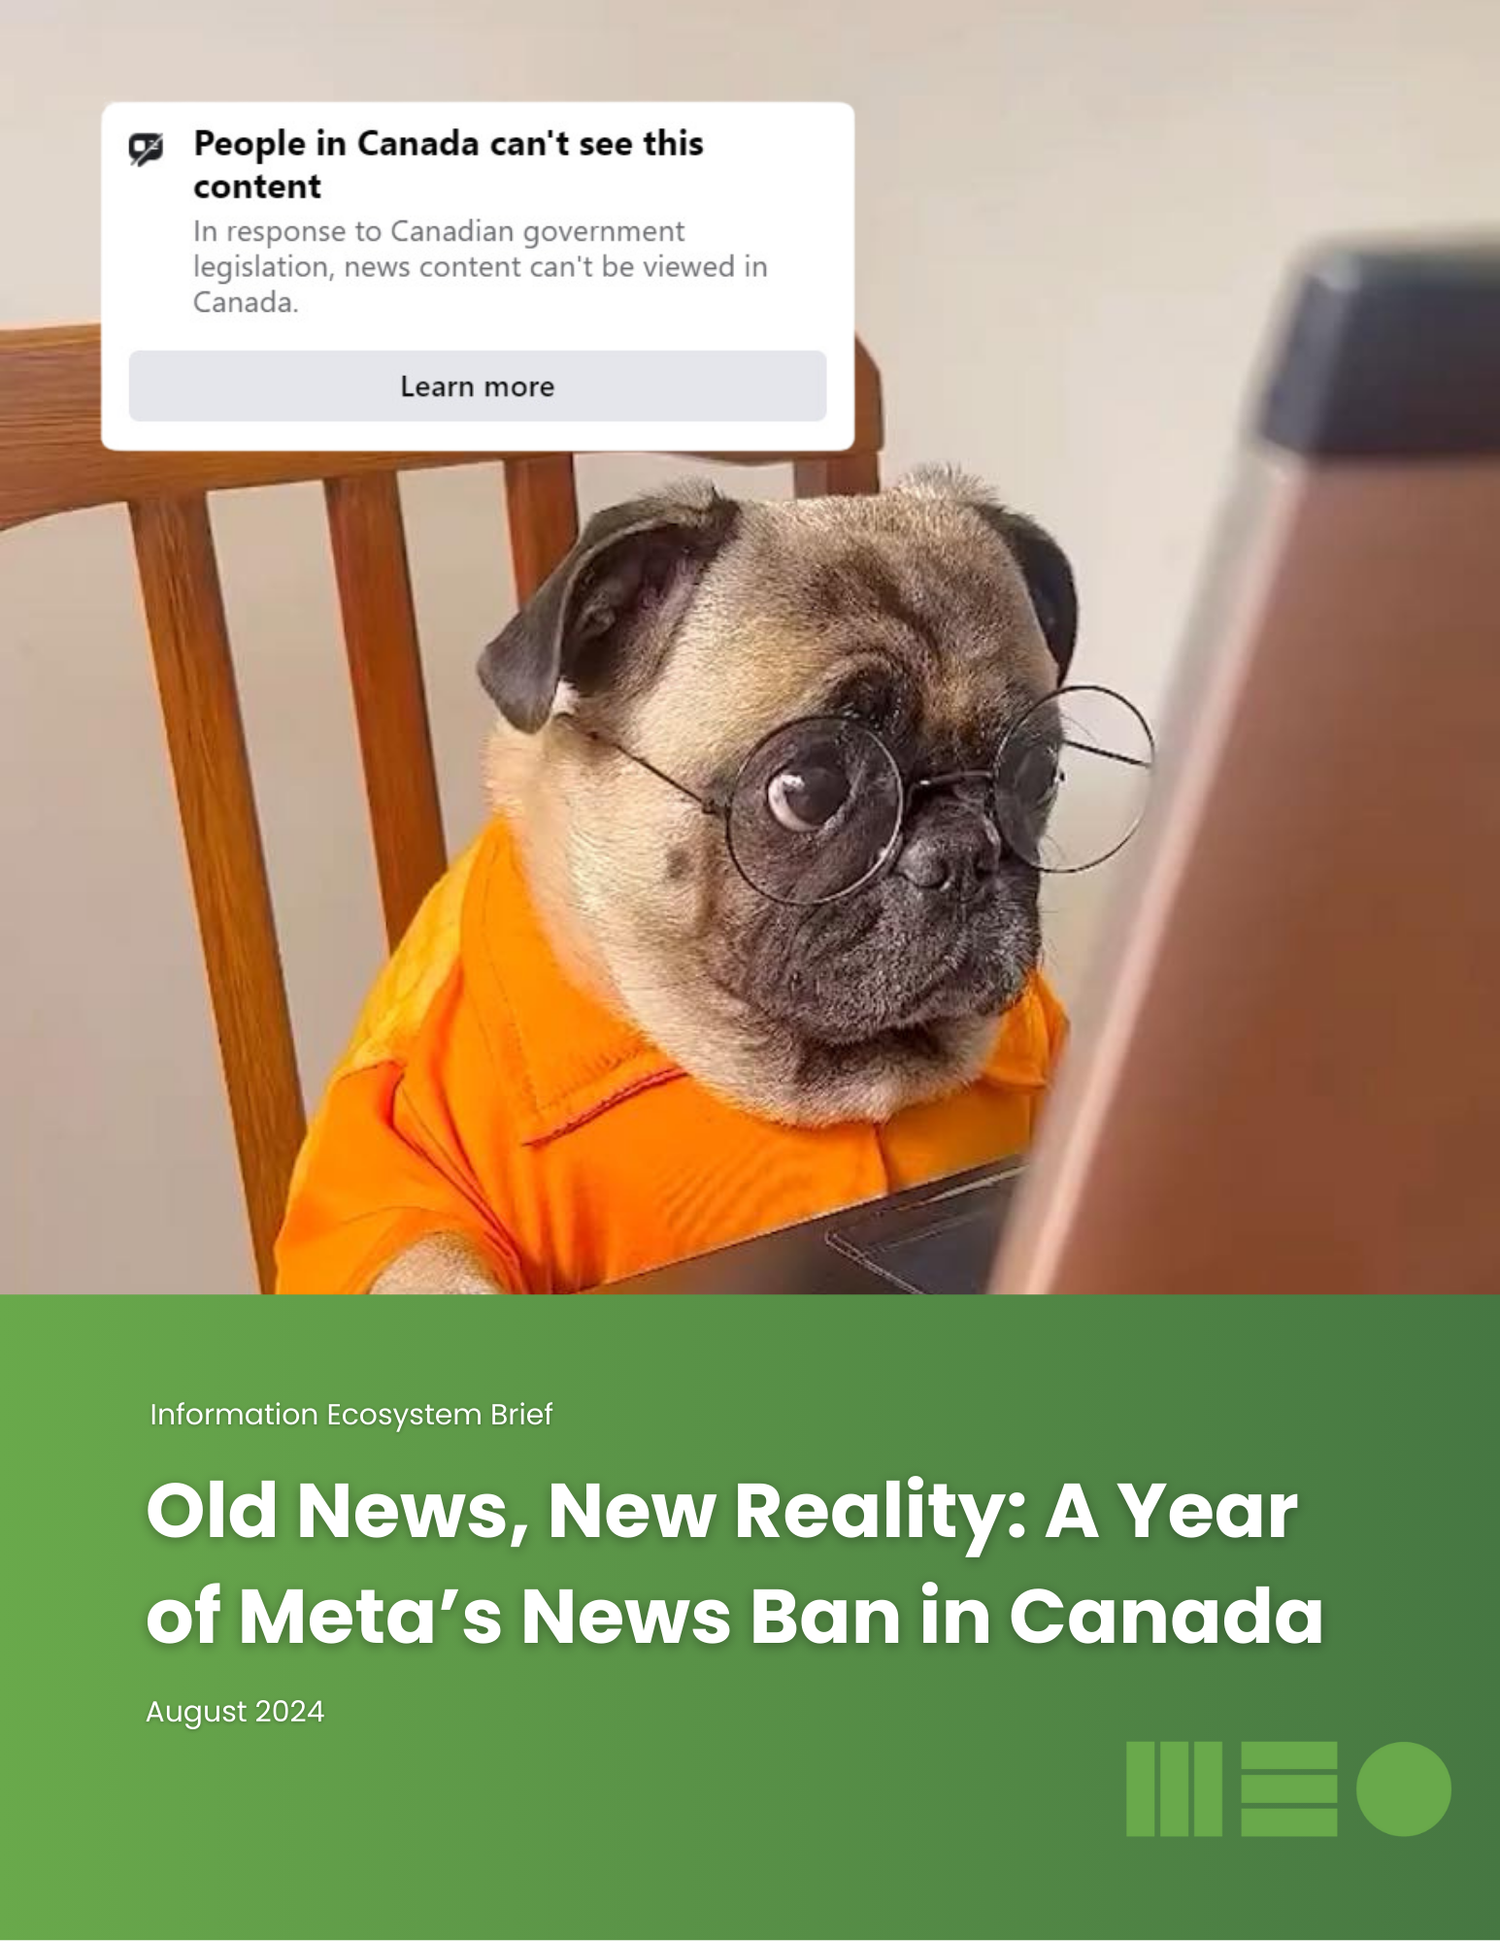 A Year of Meta's News Ban in Canada